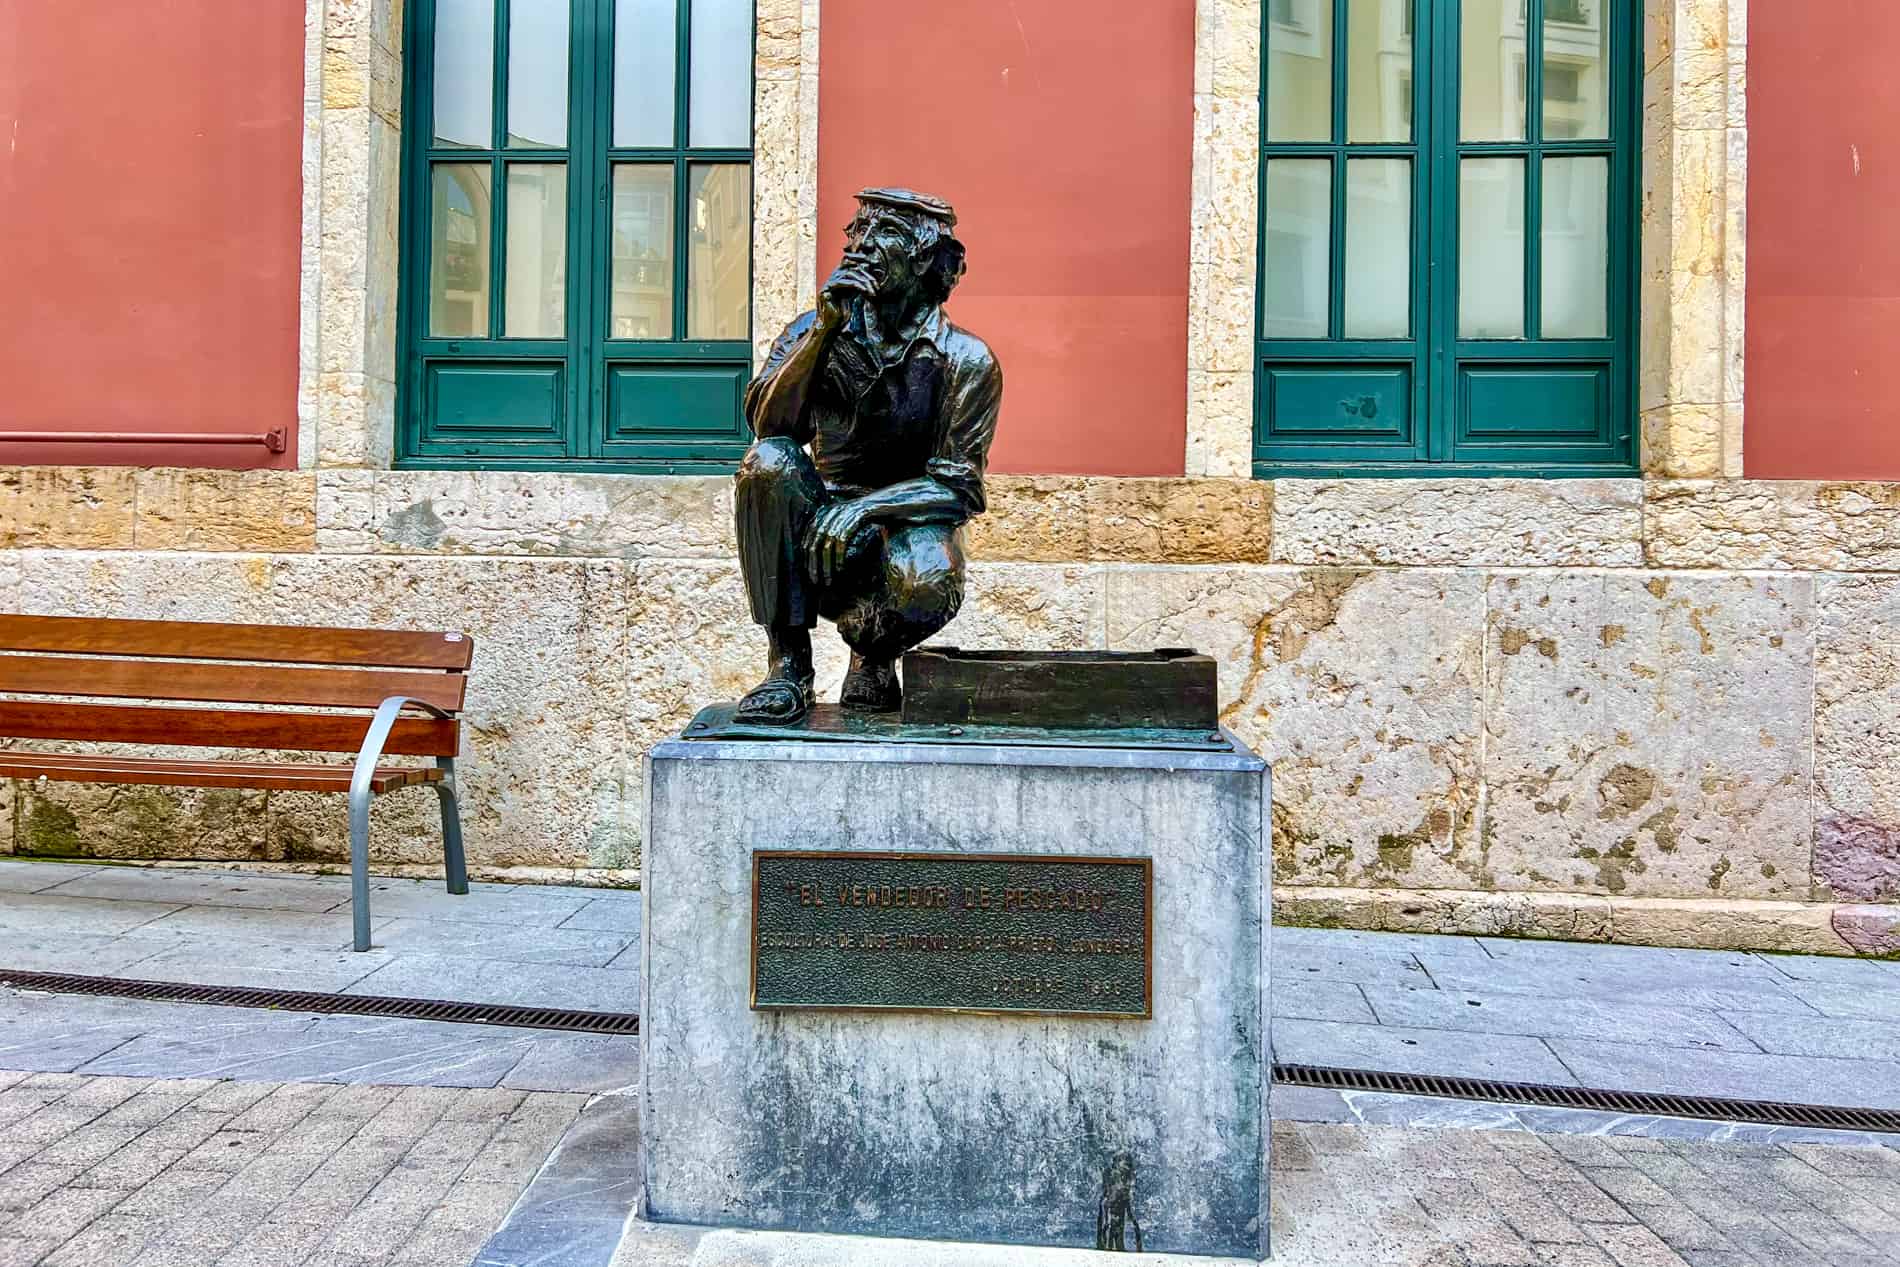 The ‘El Vendedor de Pescado’ statue in Oviedo shows a squatting fish seller next to his tray of freshly caught fish. 